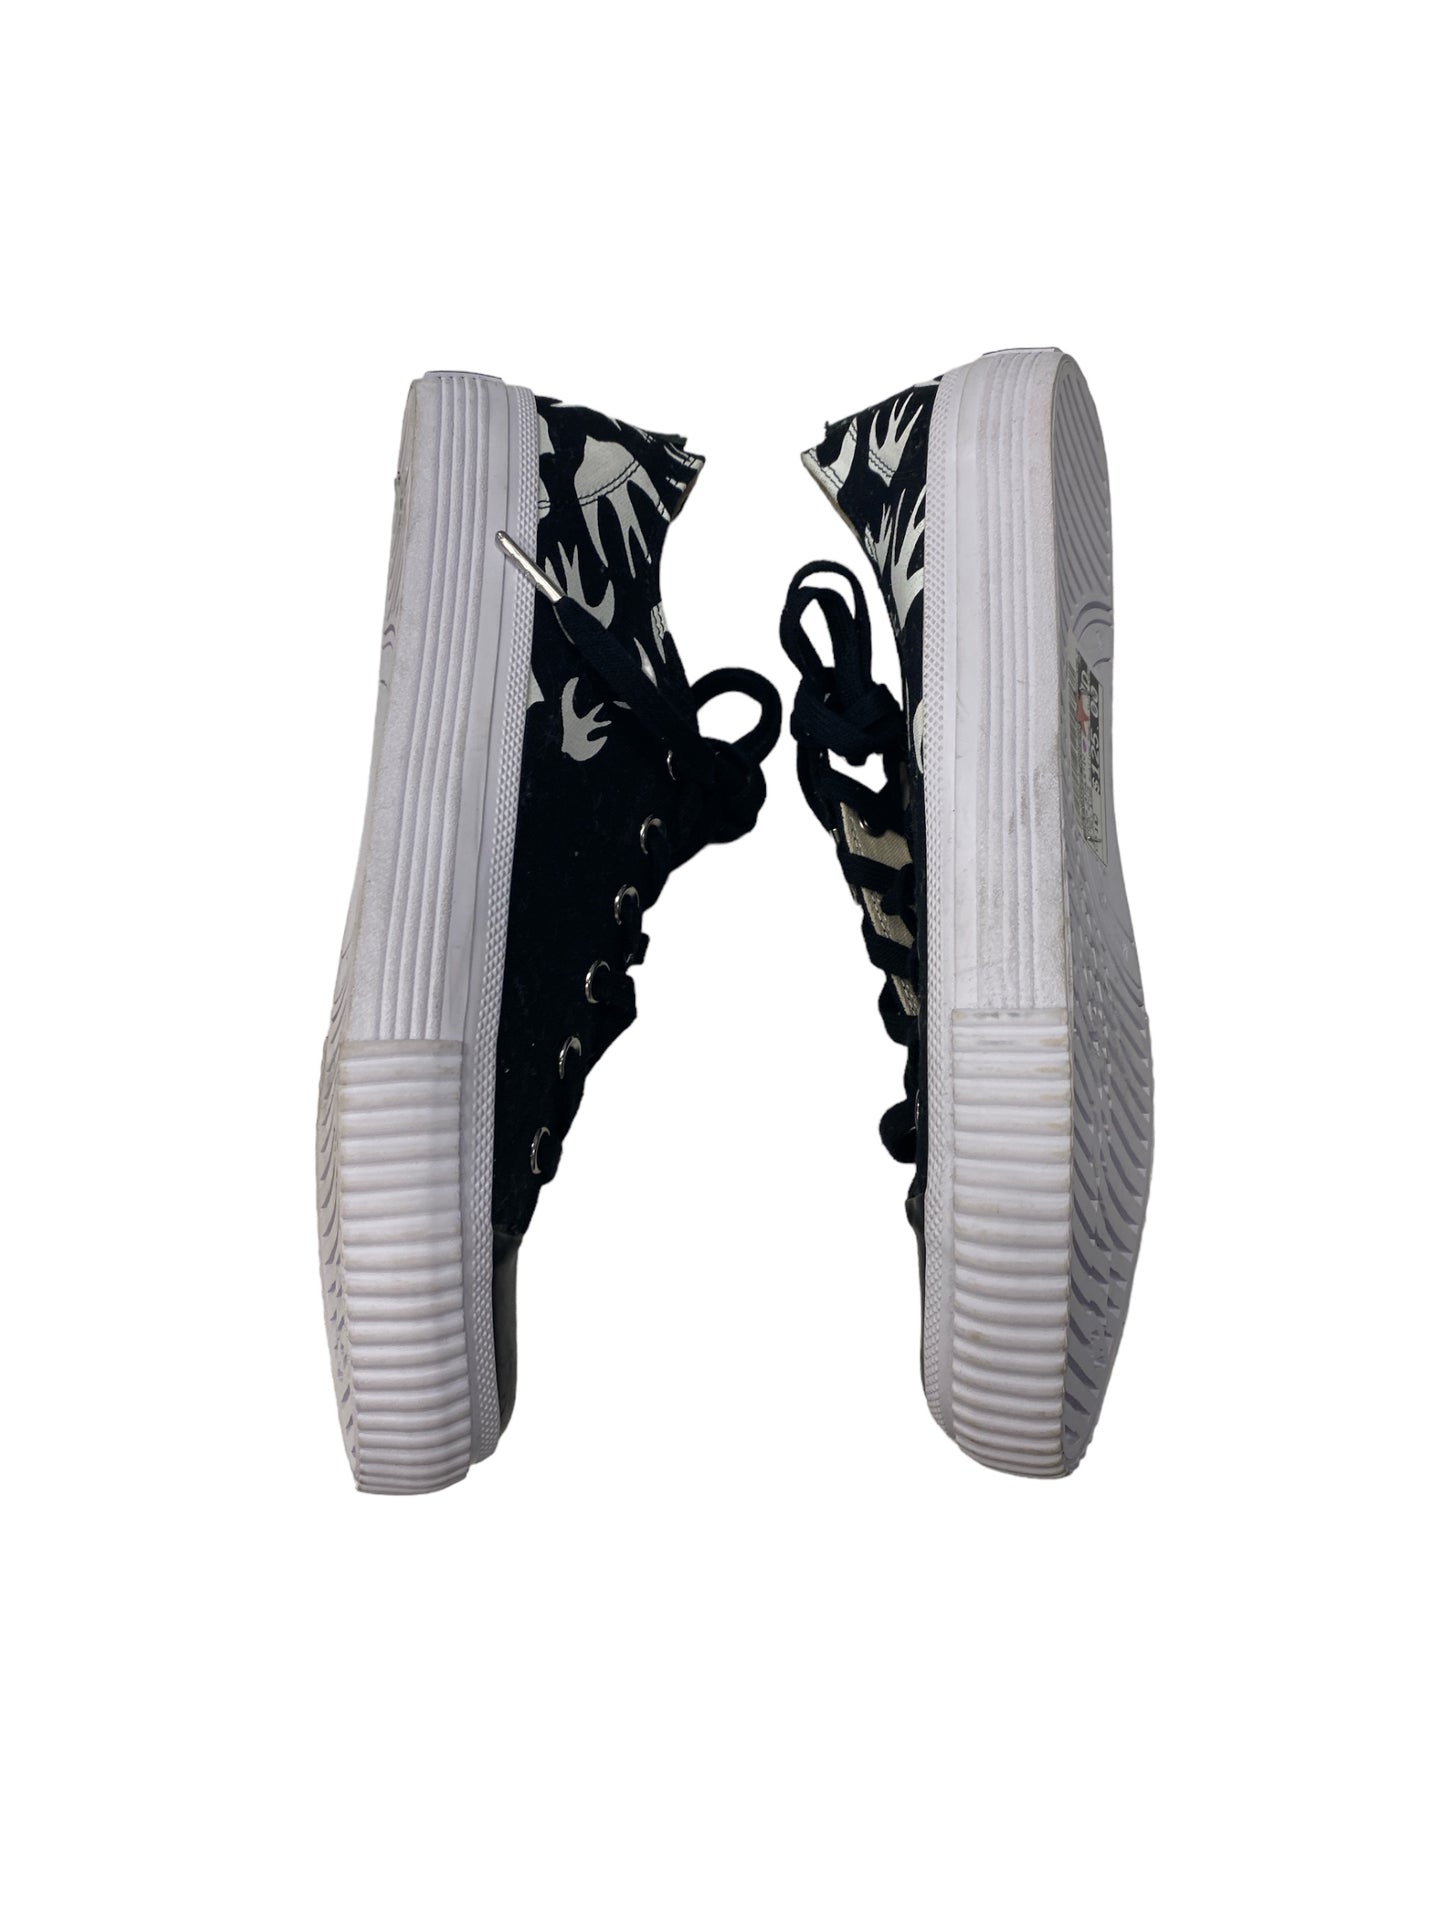 Shoes Athletic By Alexander Mcqueen  Size: 11